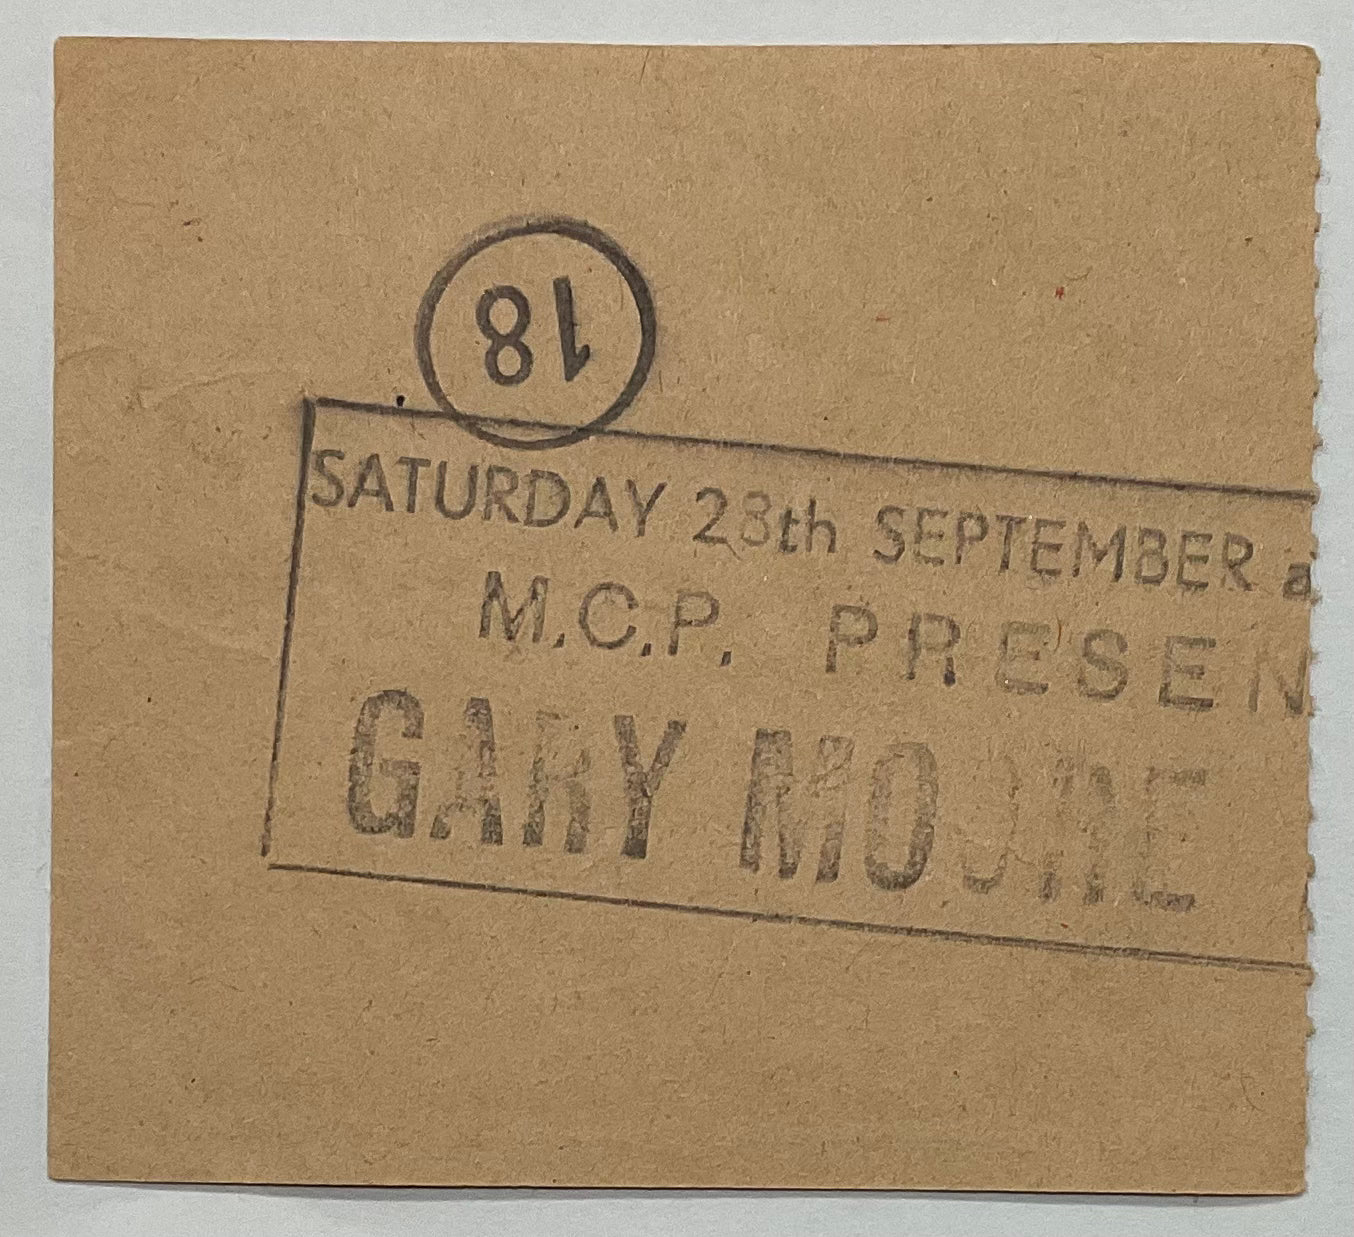 Gary Moore Original Used Concert Ticket Hammersmith Odeon London 28th Sep 1985